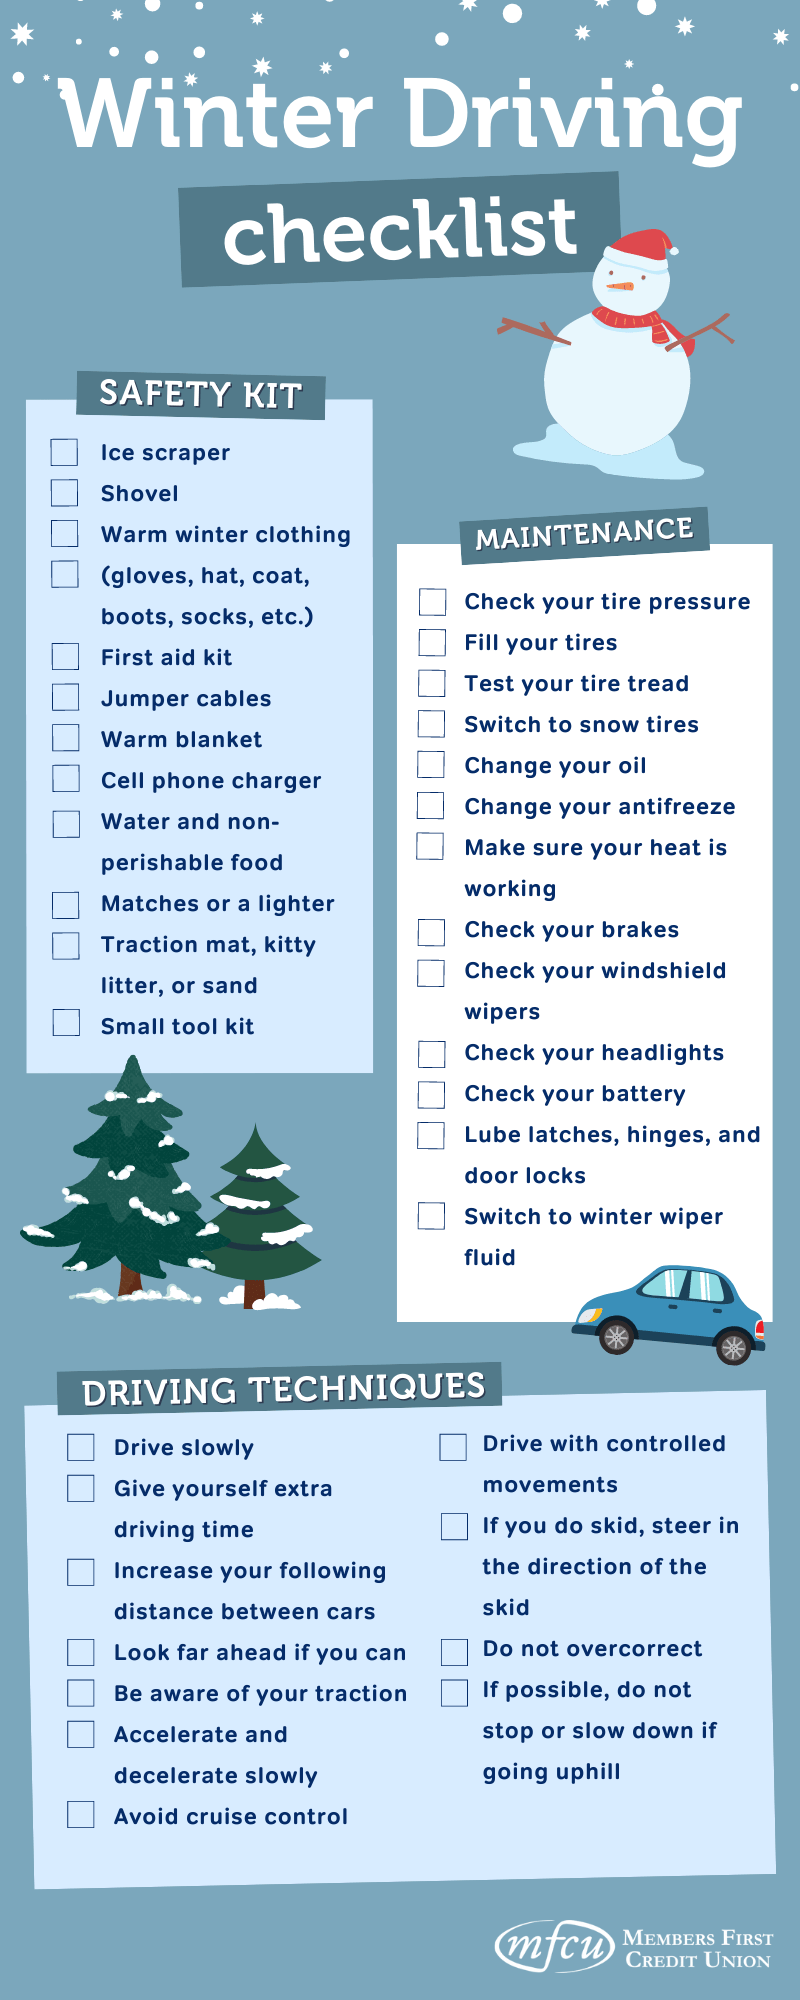 A blue check list of winter driving safety kit items, driving techniques, and maintenance